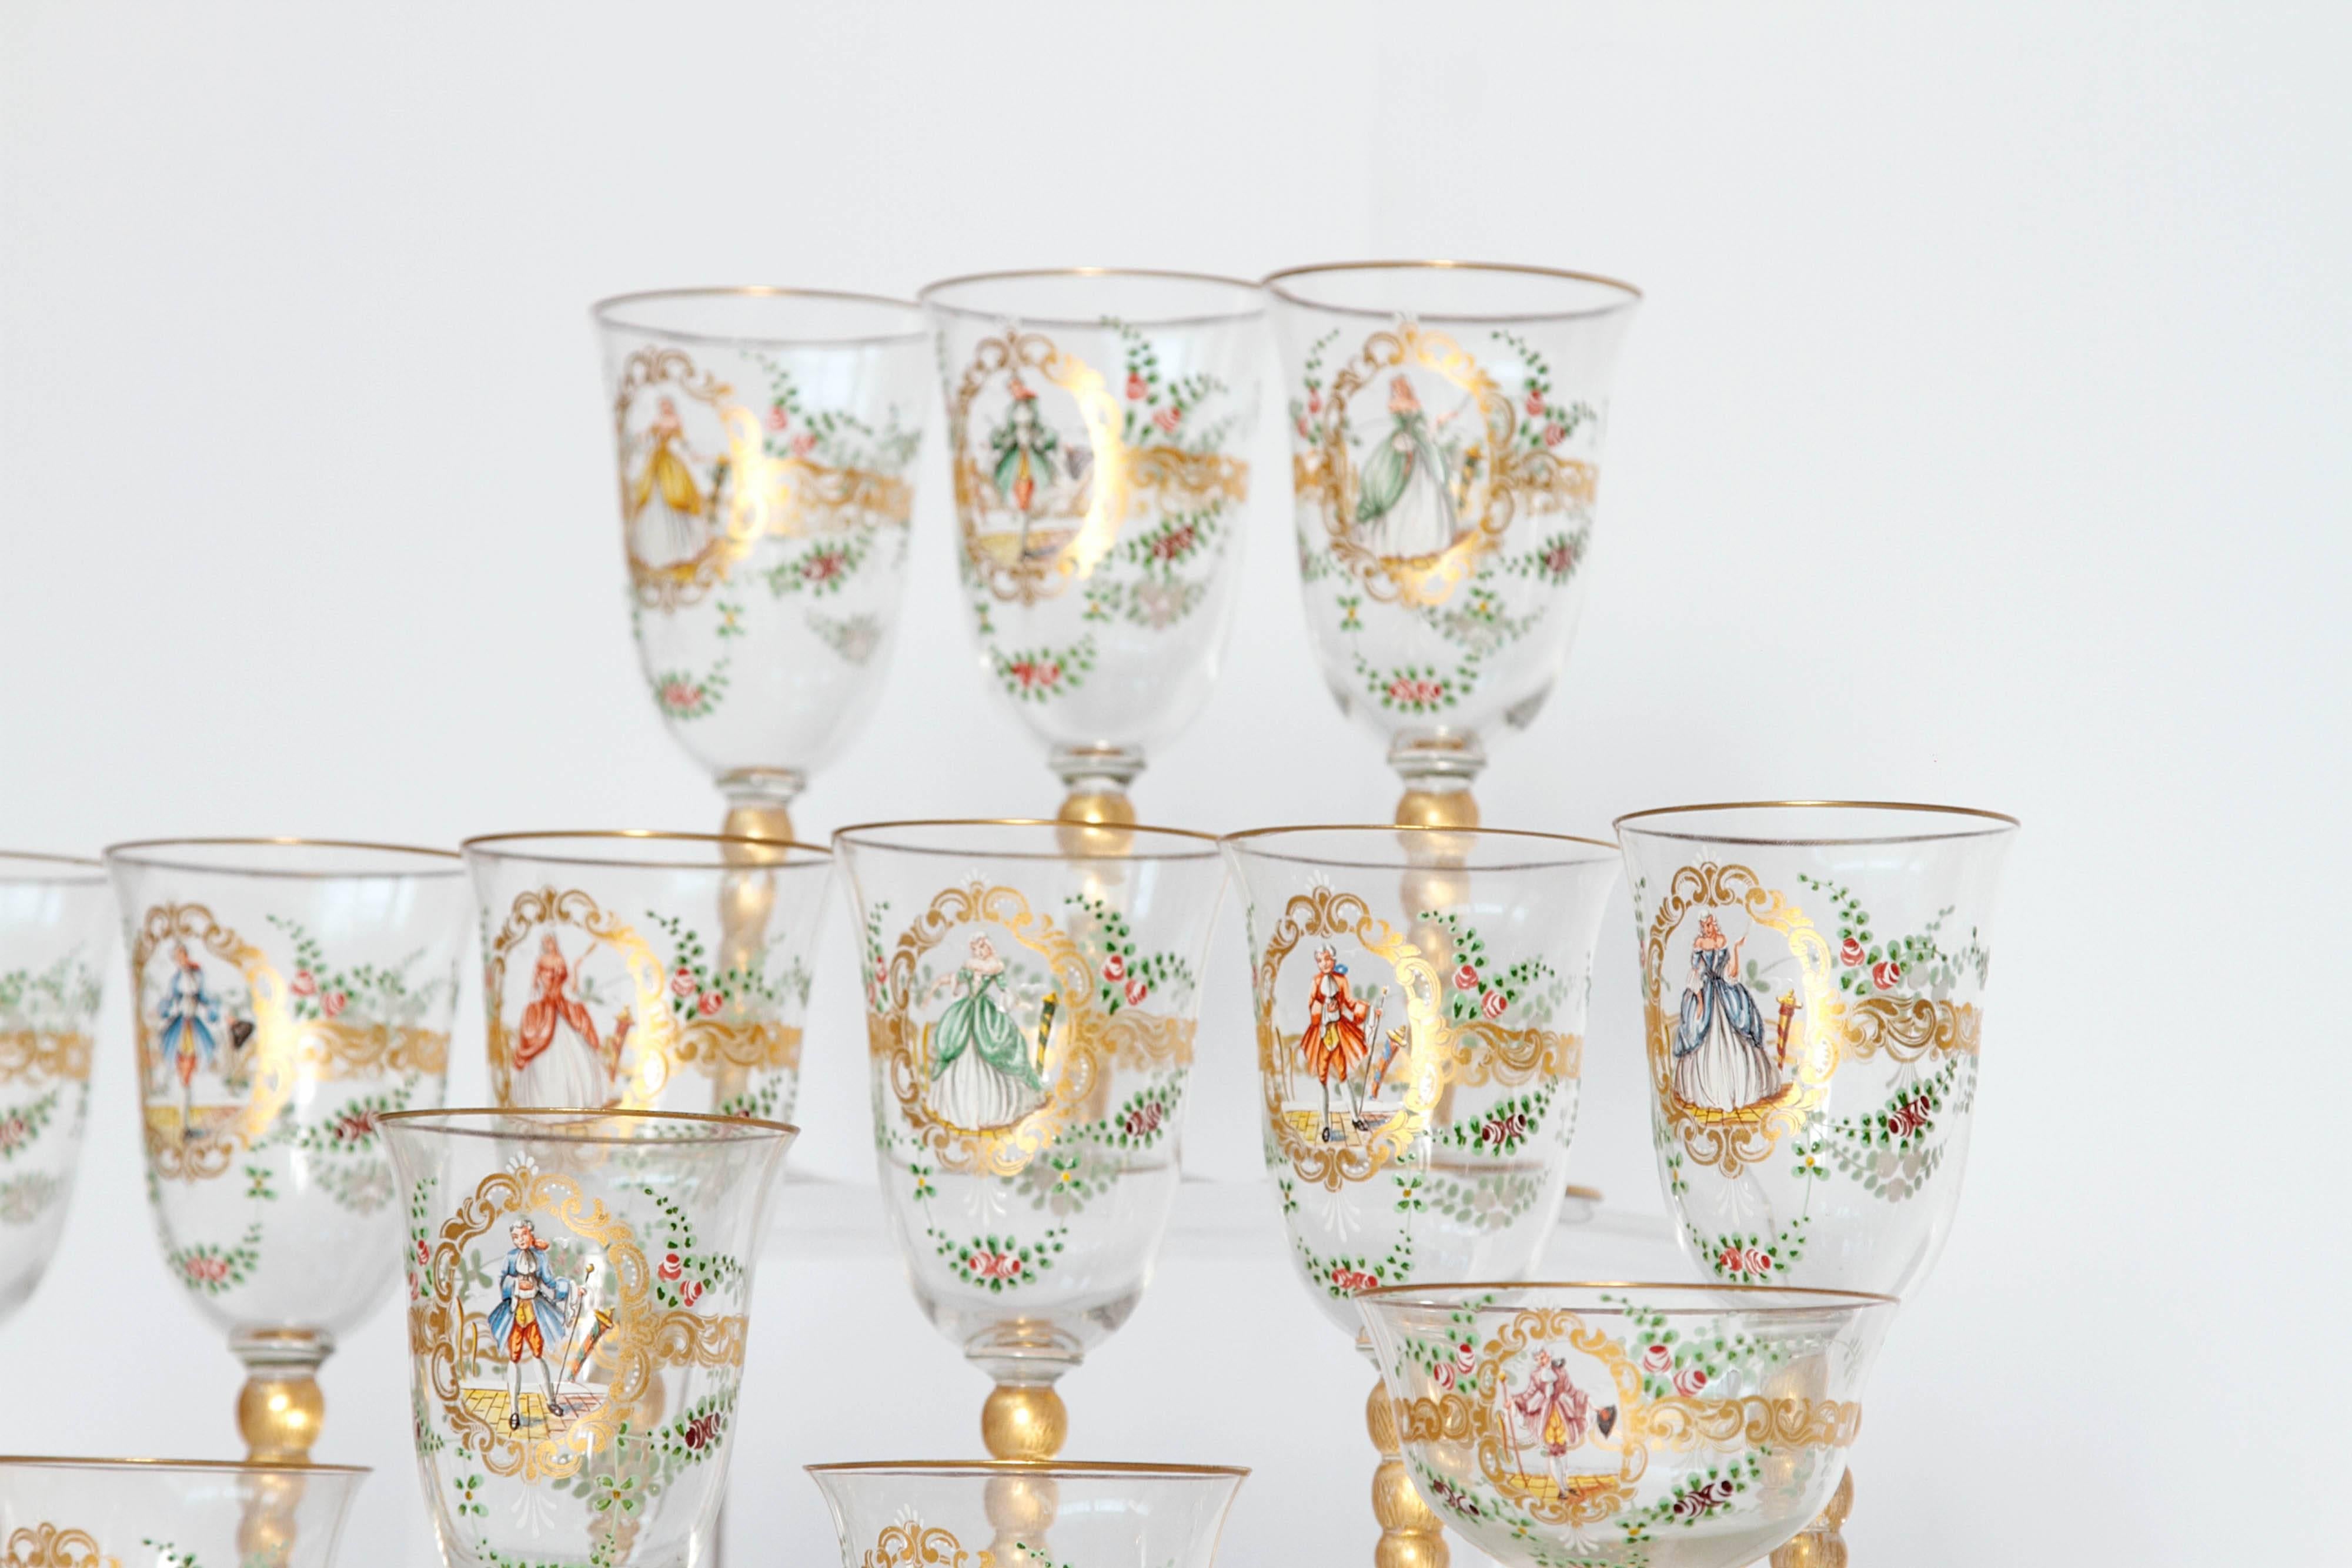 20th Century Enameled Venetian Glass Stemware or Group of 23 Pieces